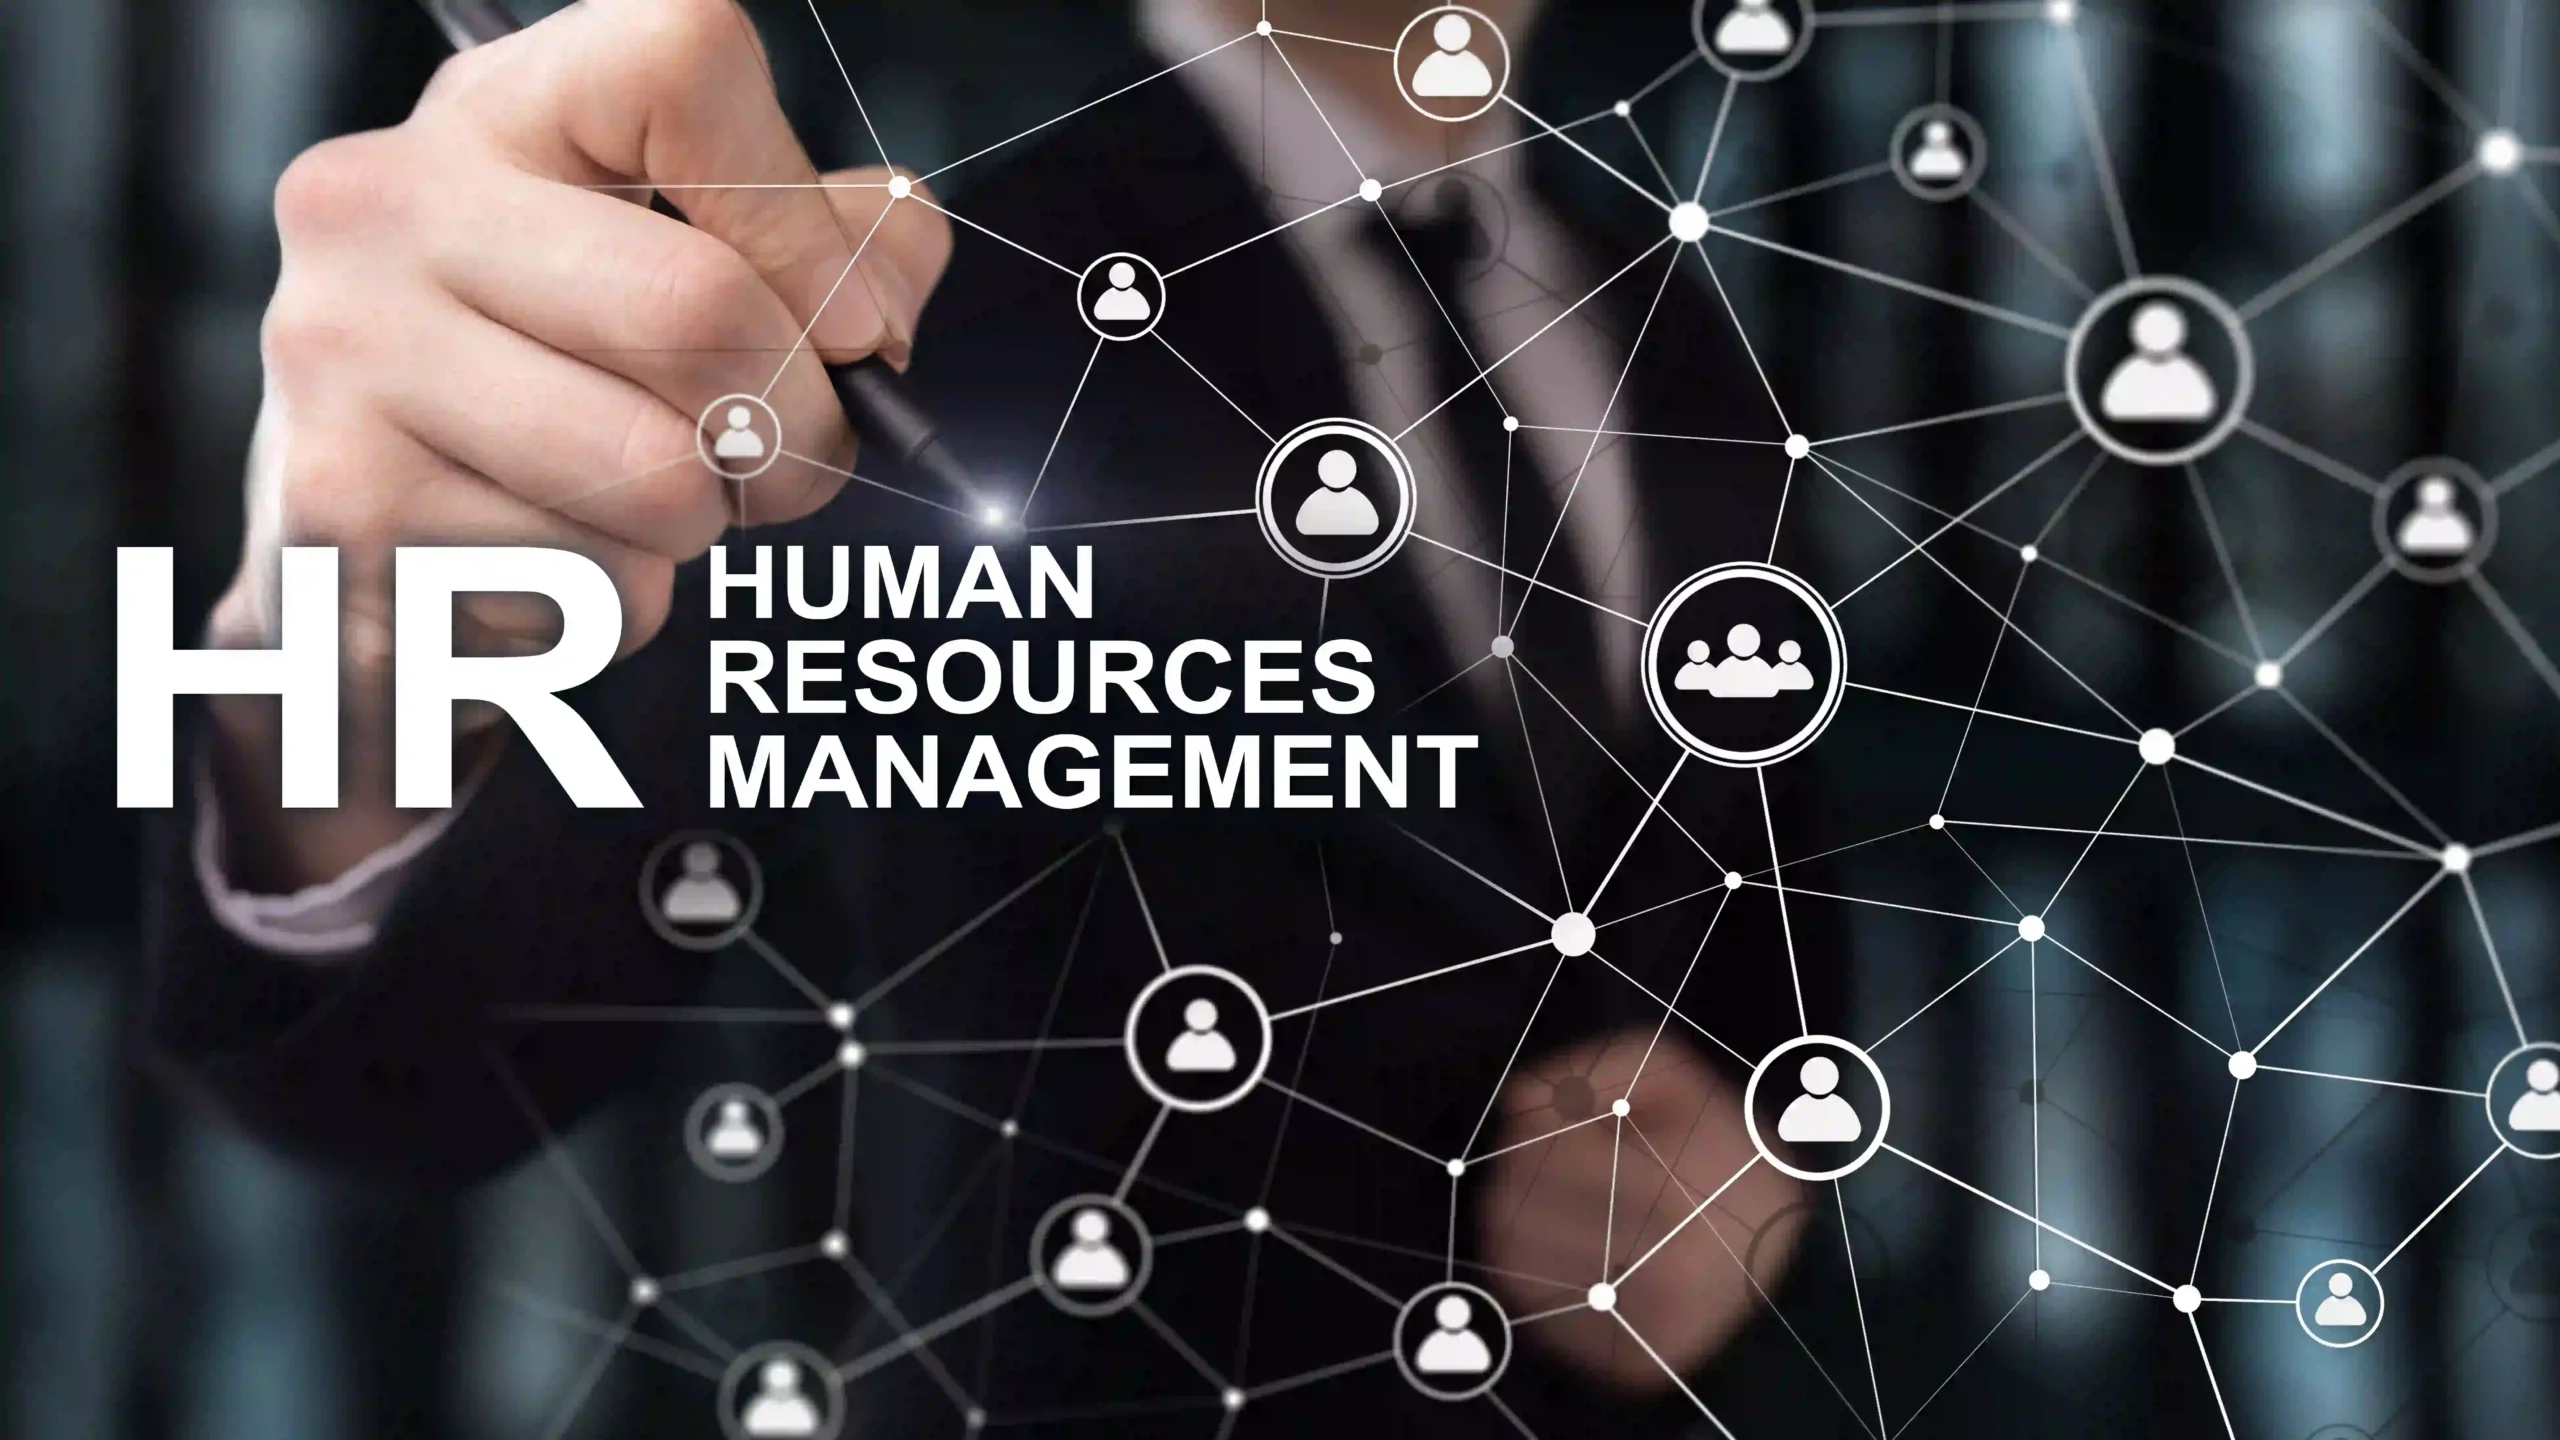 The 9 Steps for Transforming HR Management